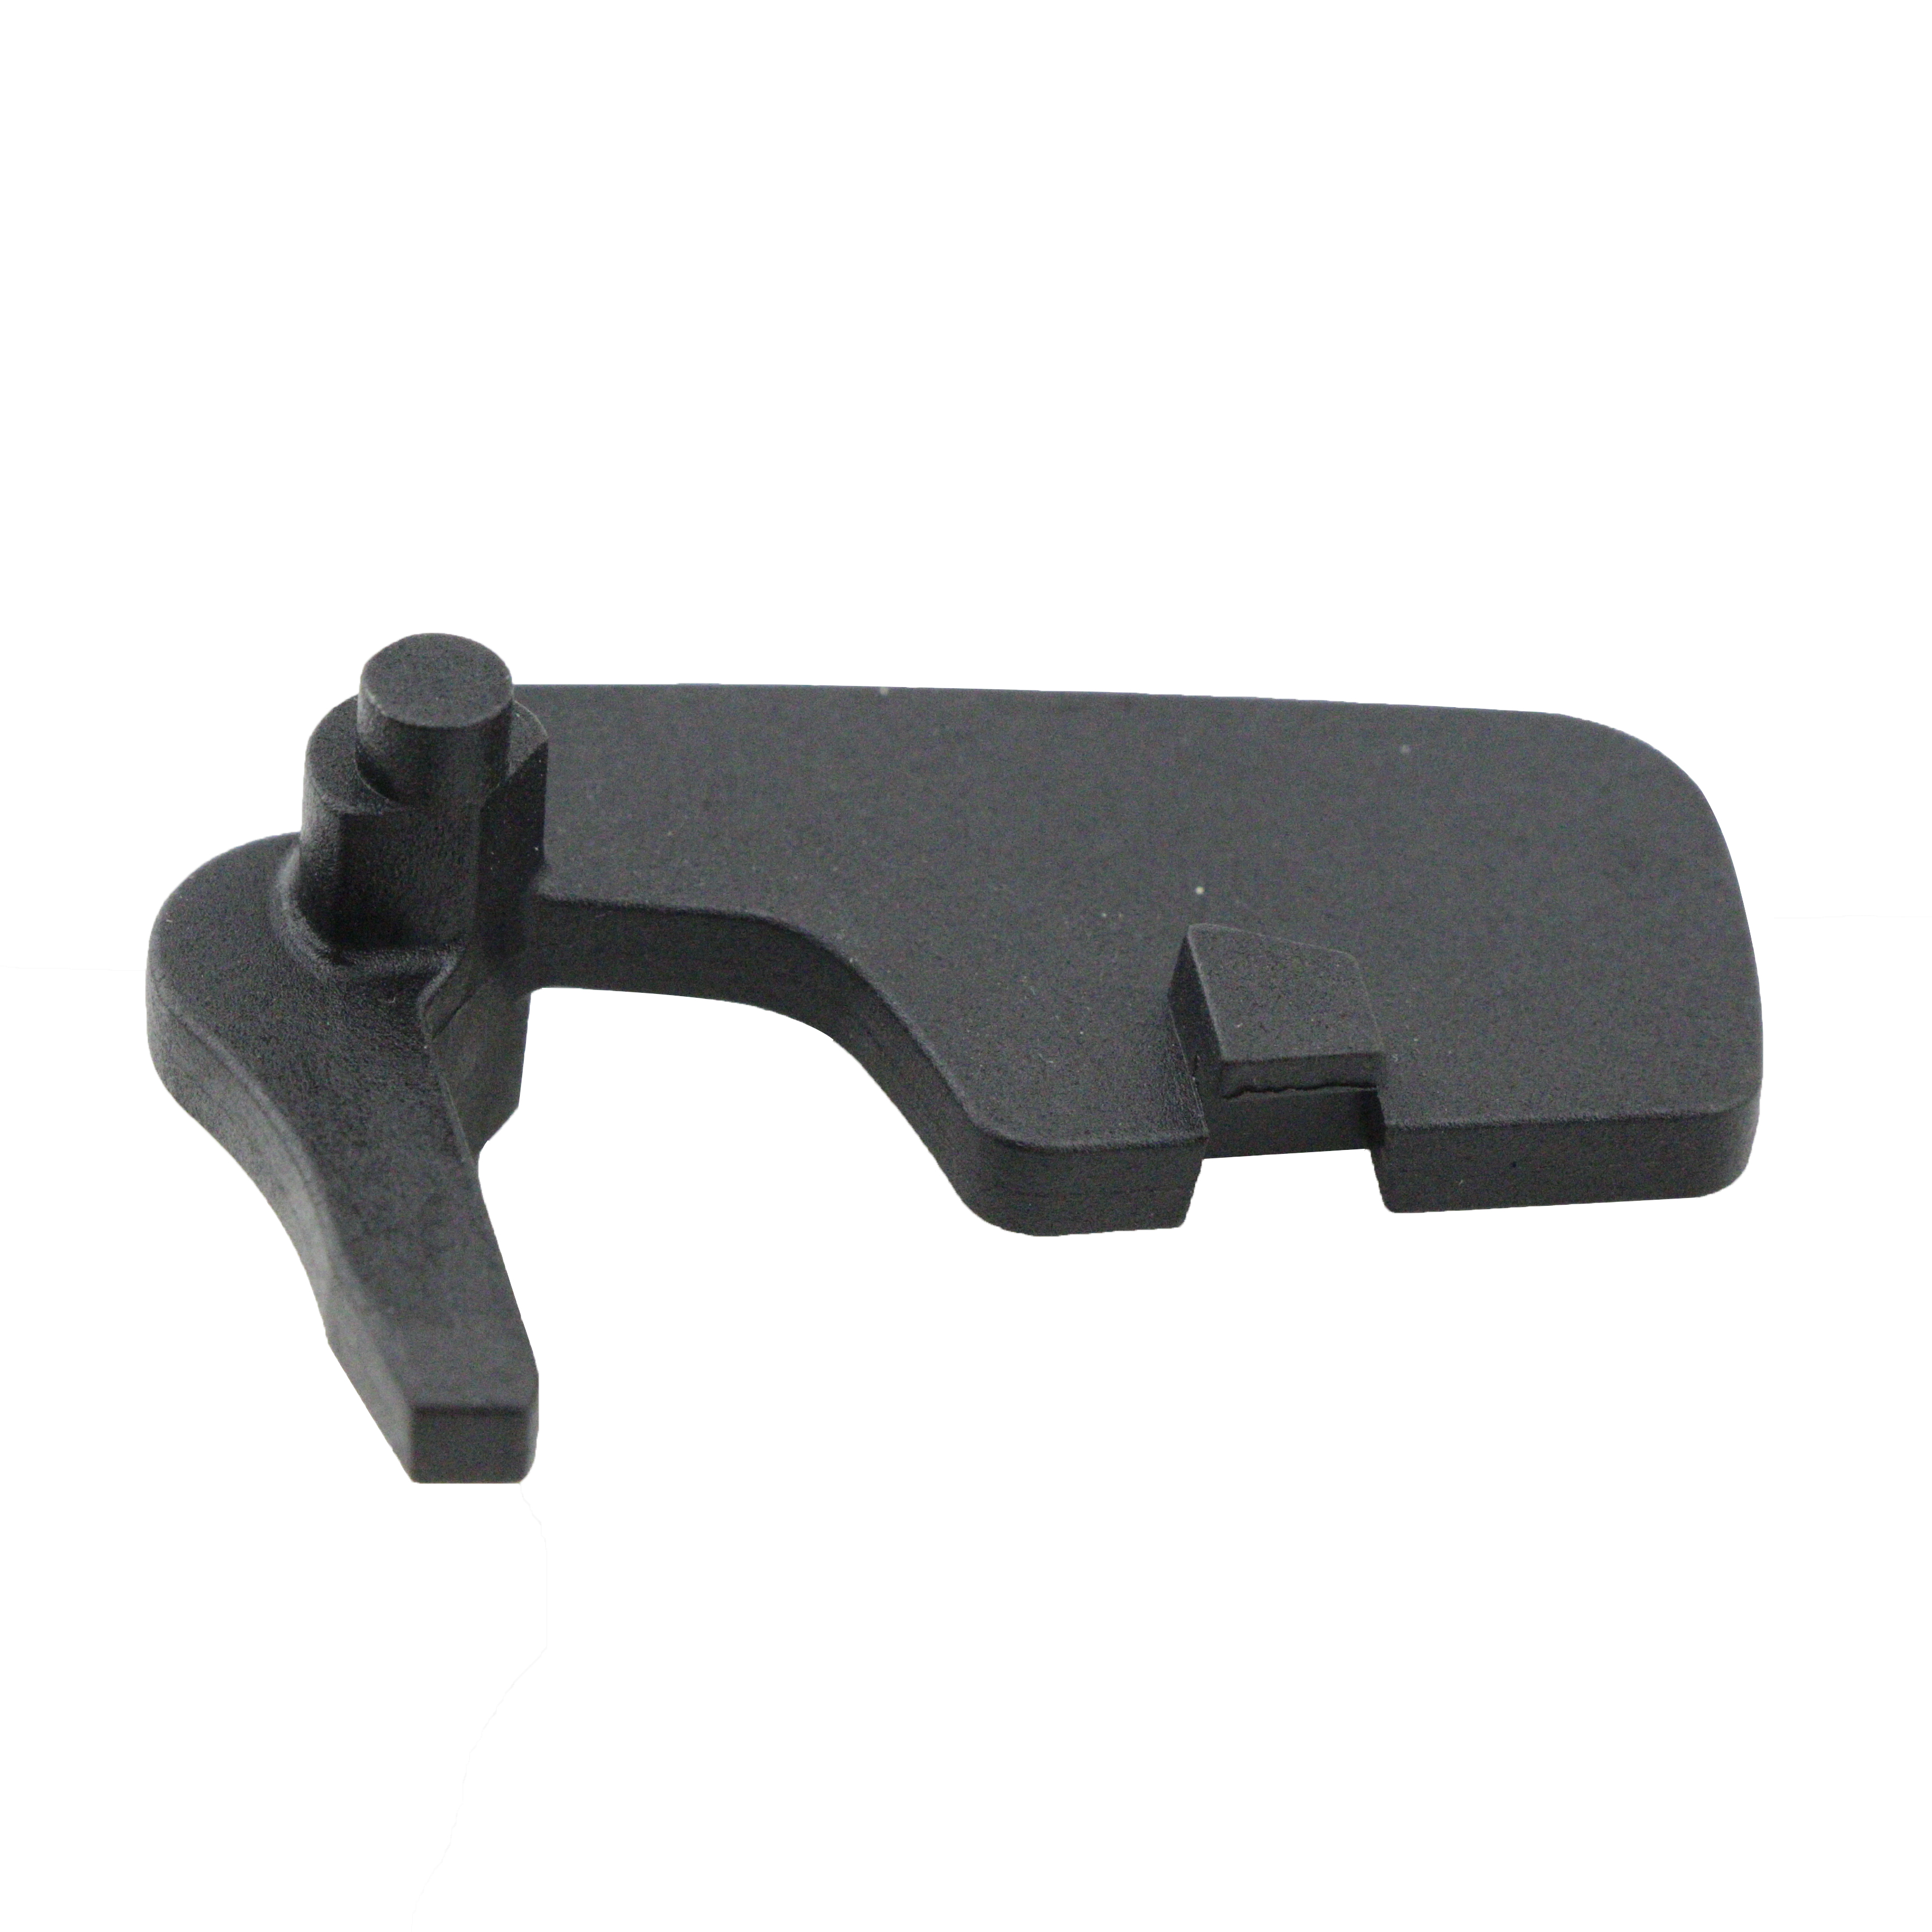 SPARE PARTS FOR STIHL FITS THE STIHL TS400 THROTTLE TRIGGER CONTROL LEVER 